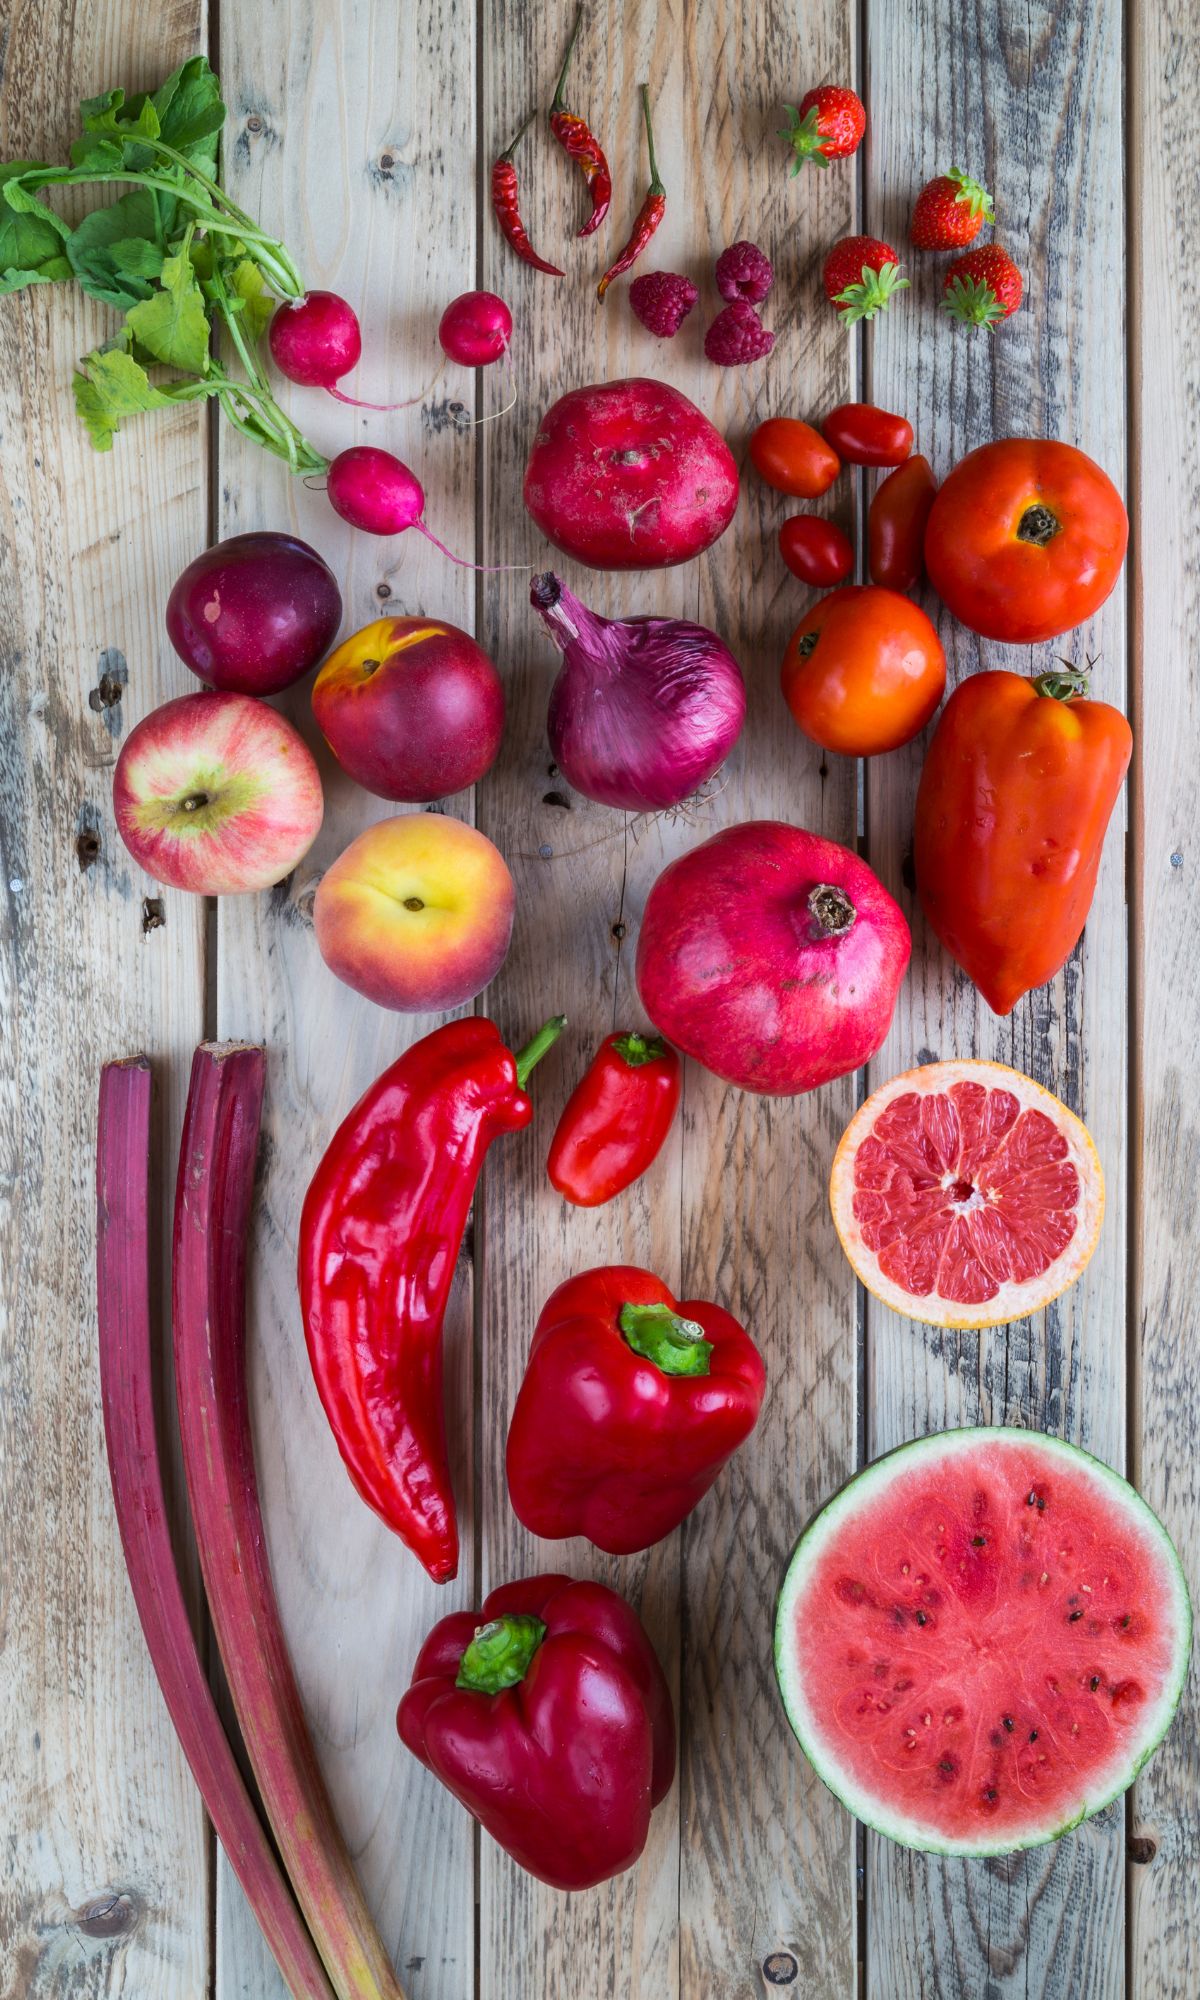 red fruits and vegetables list